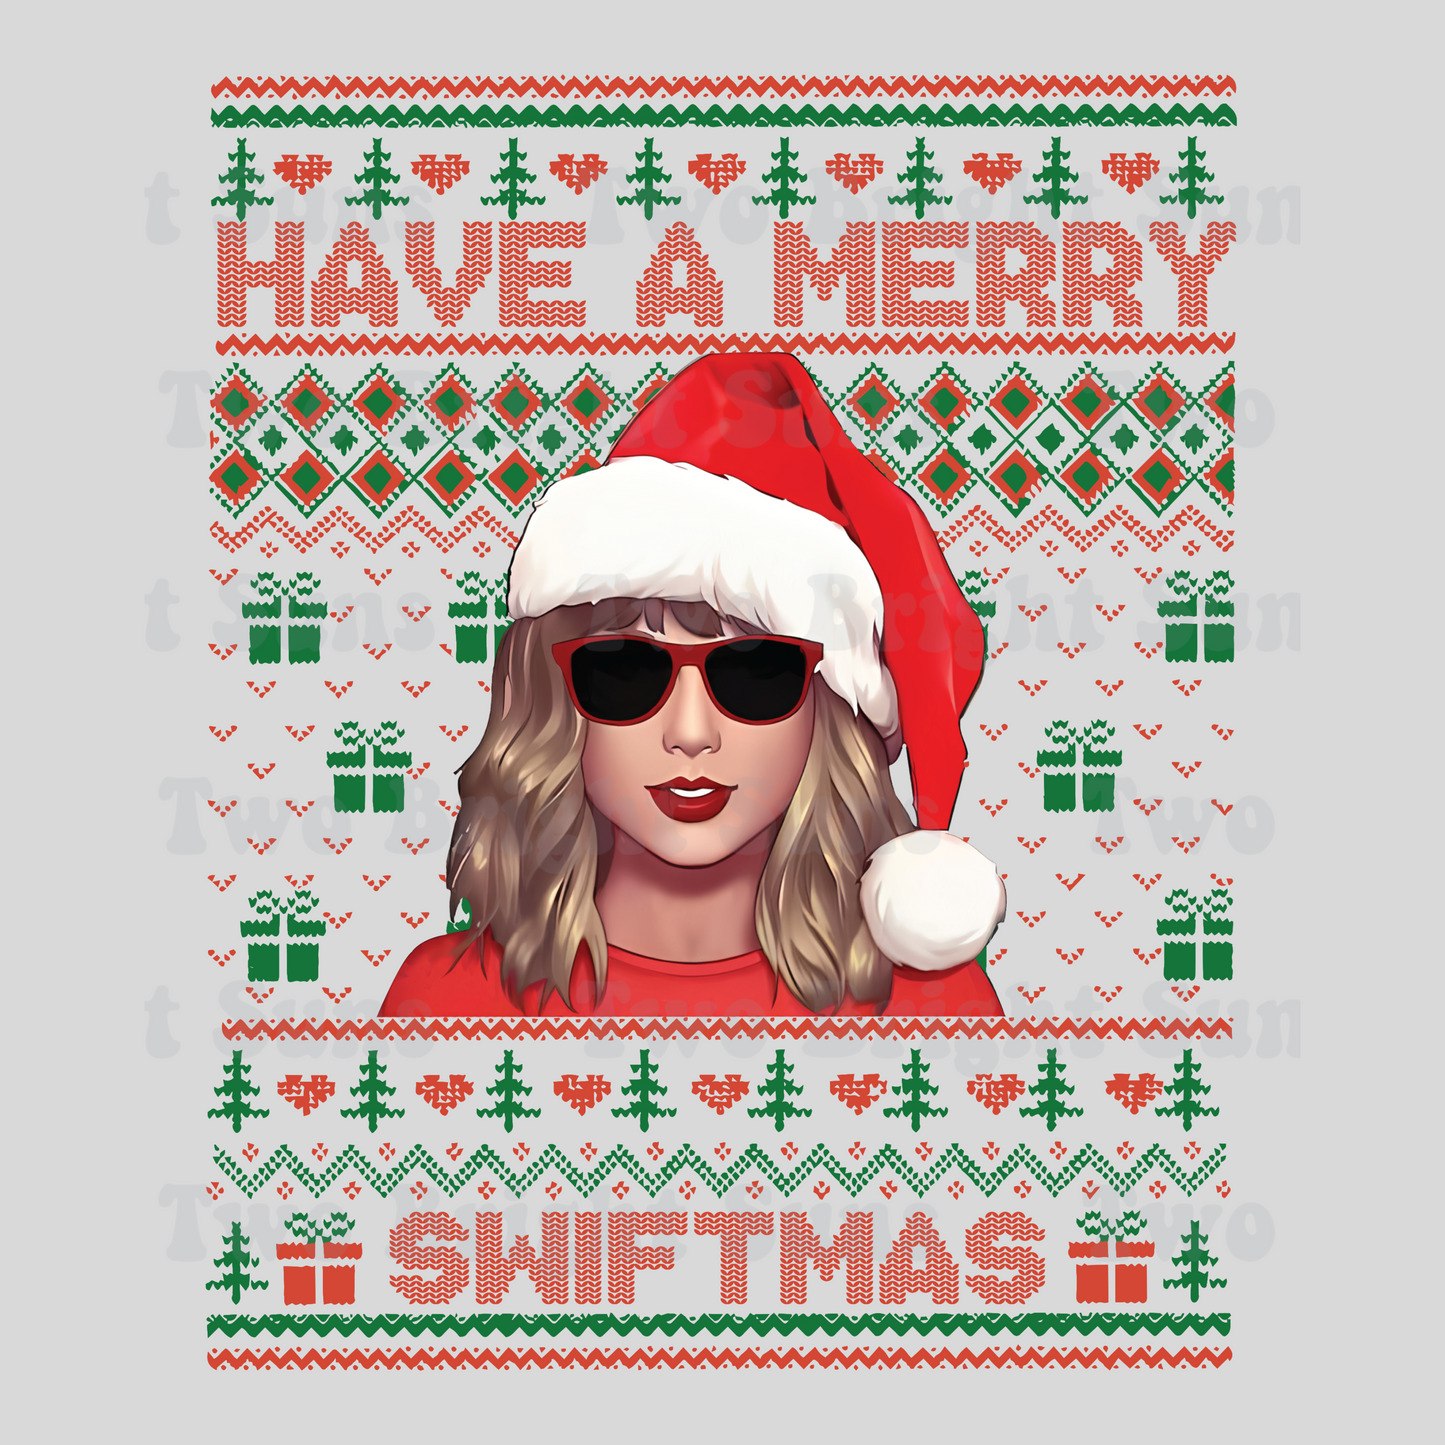 Have a Merry Swiftmas